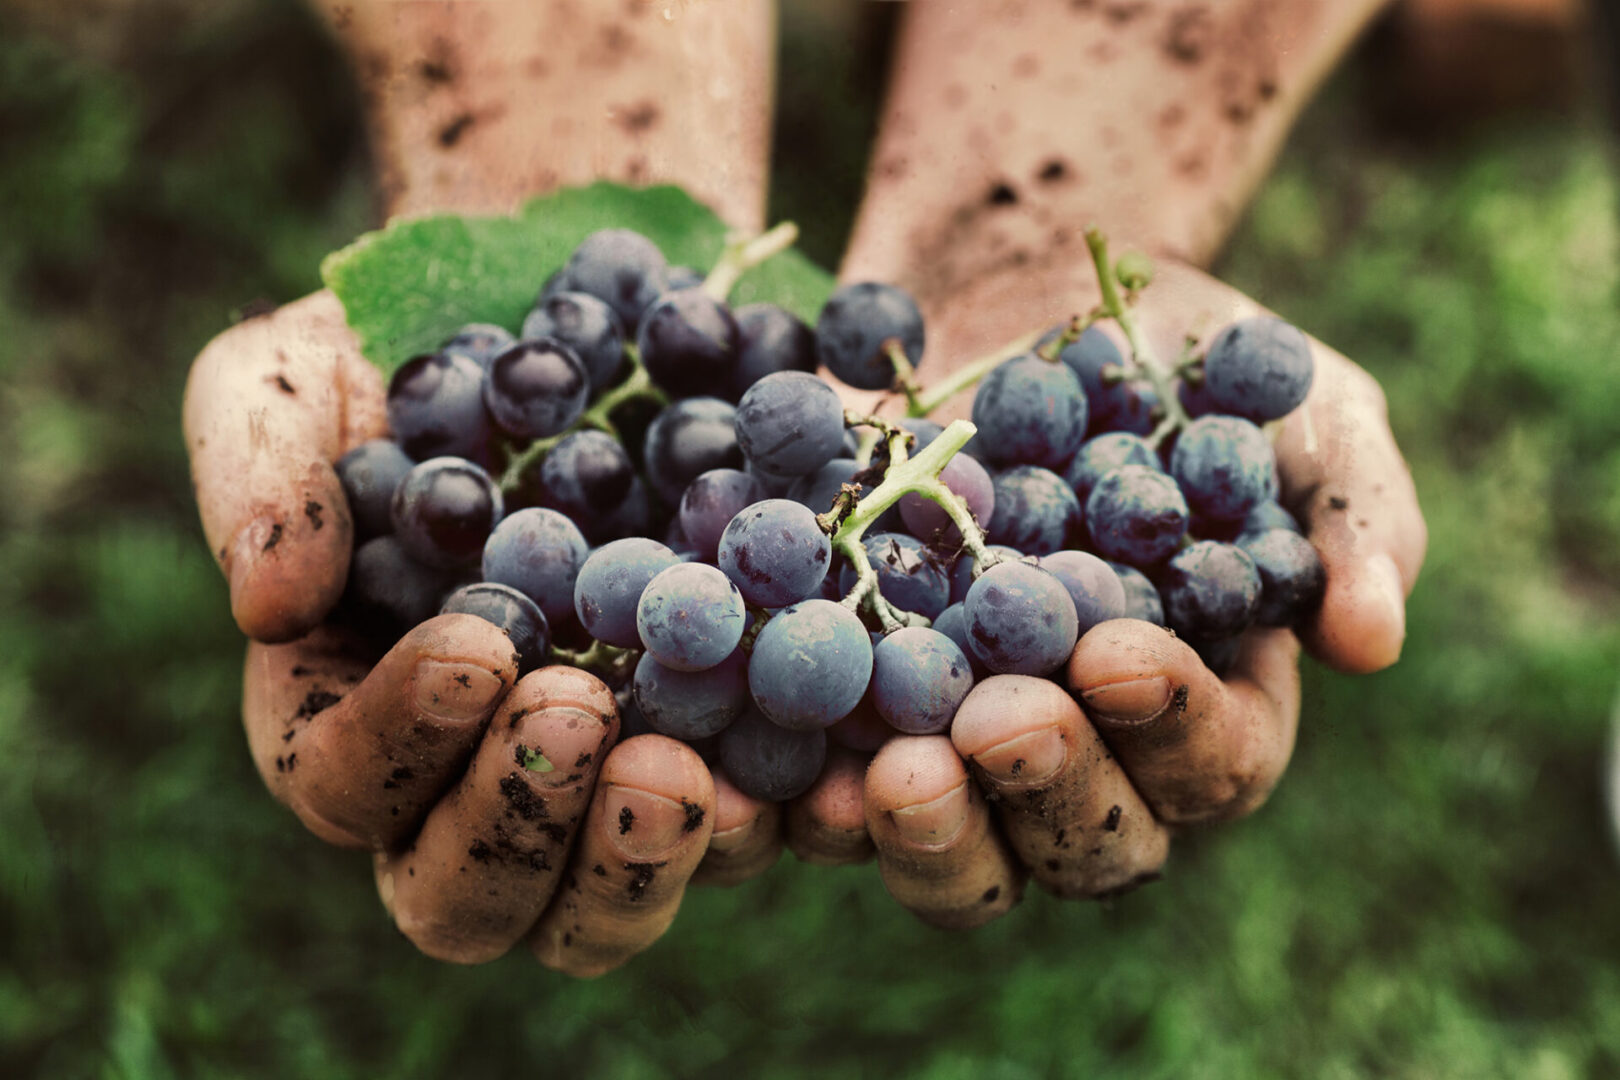 A person holding grapes in their hands